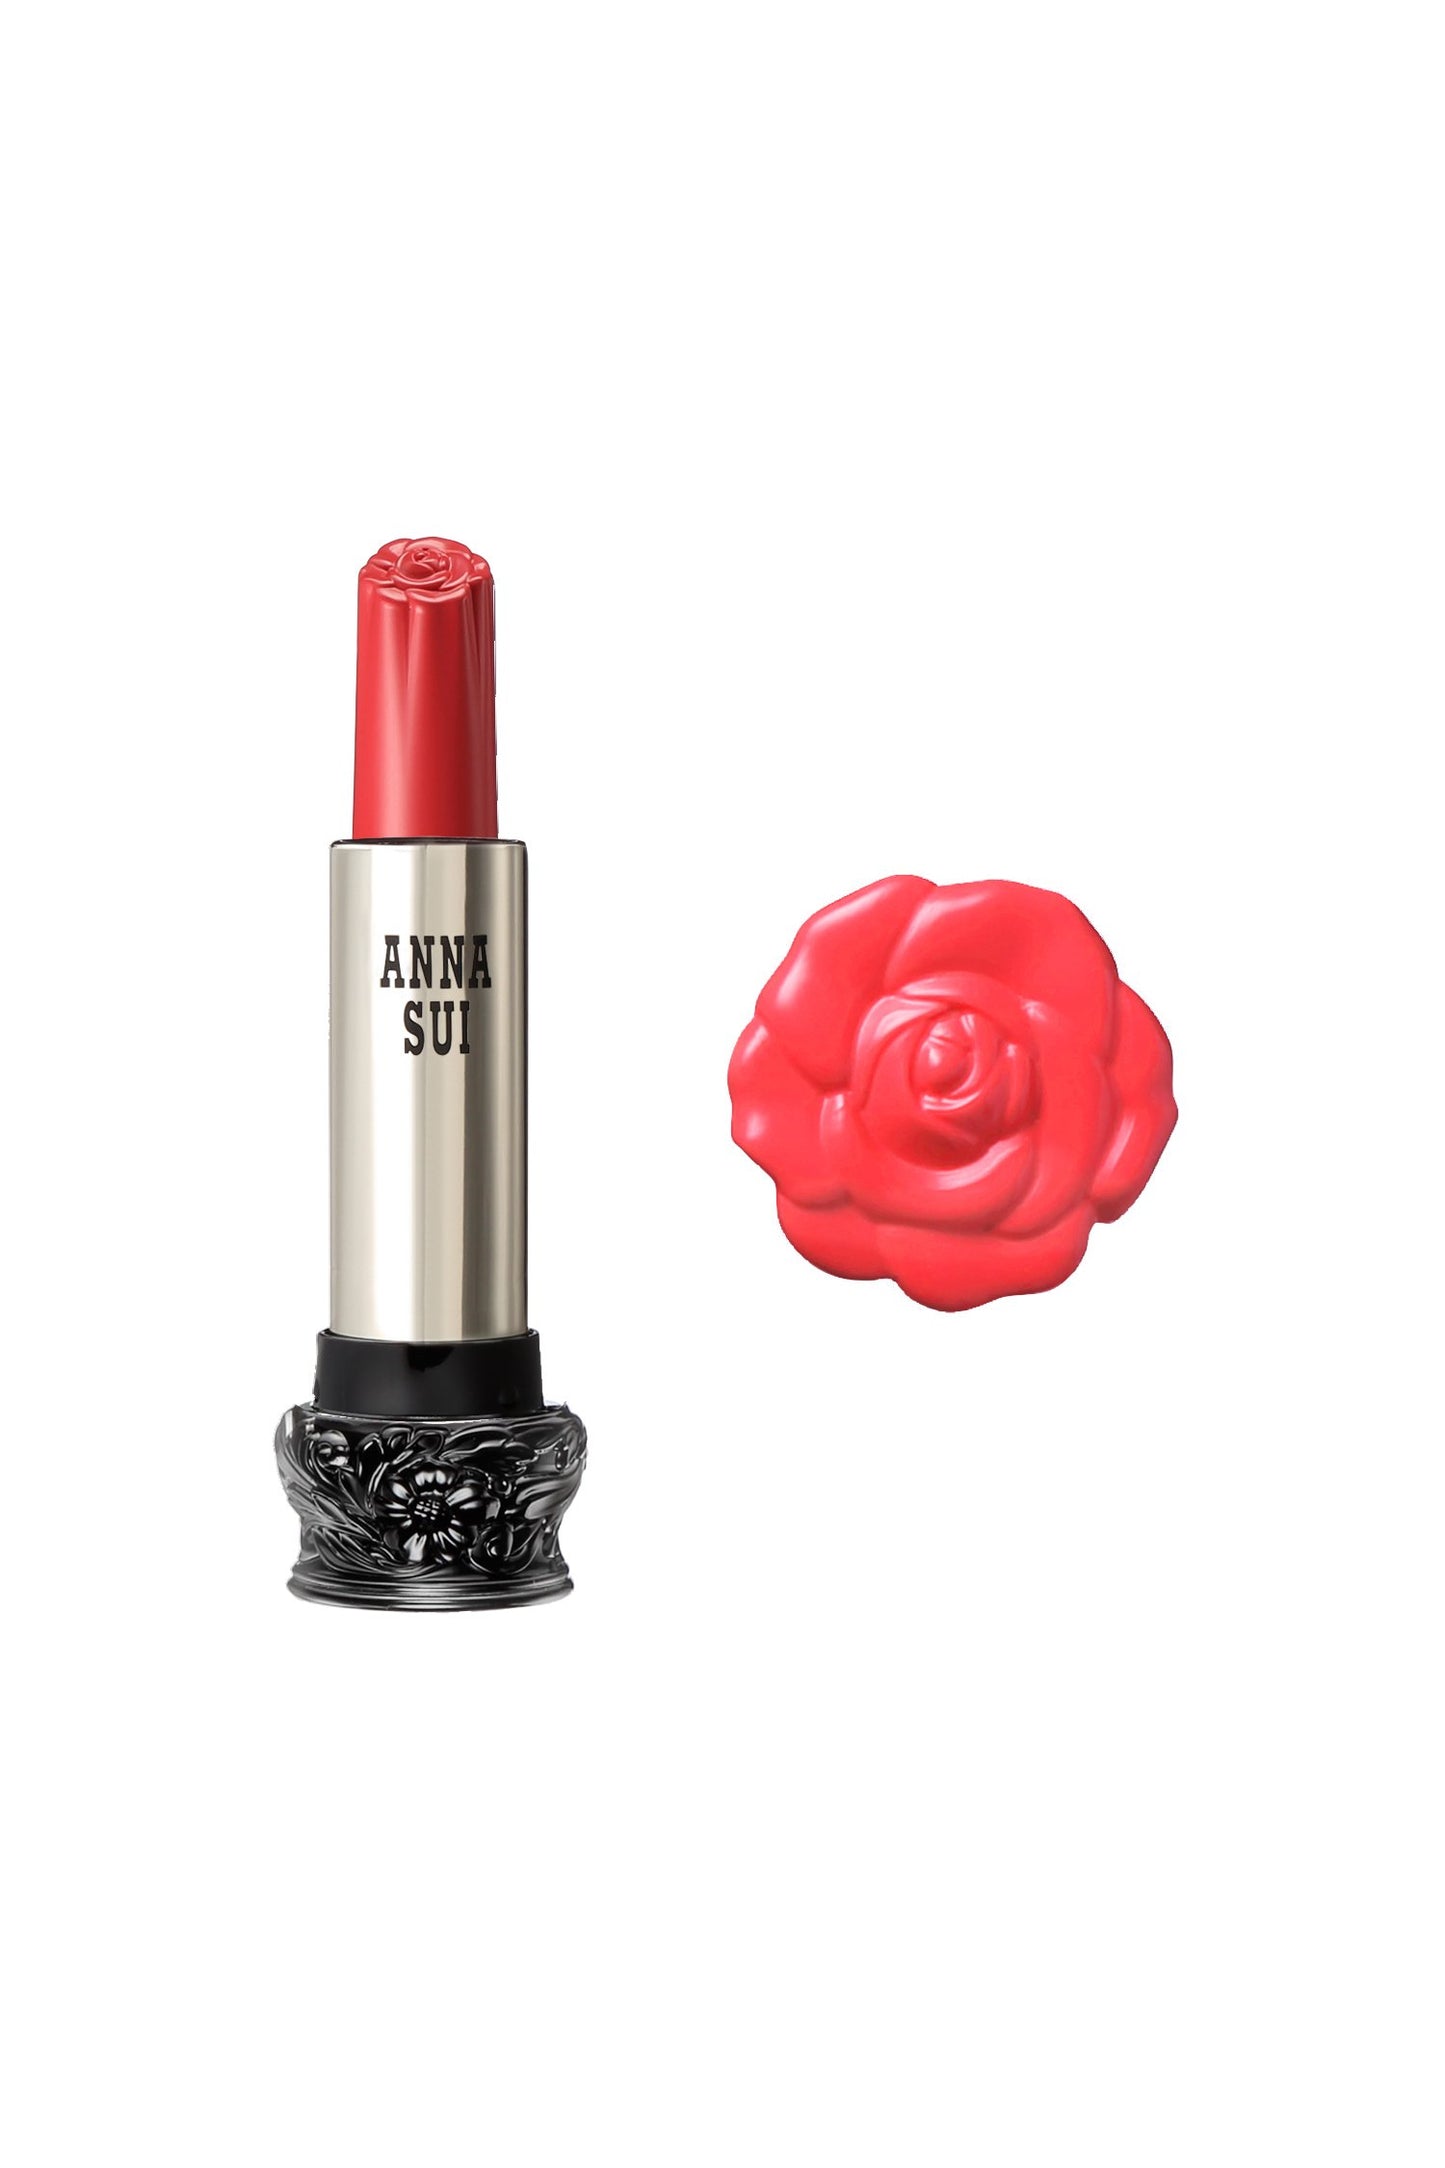 601 - Orange Tulip Lipstick F: Fairy Flower, in a cylindrical container, large black base, engraved floral design, metallic body